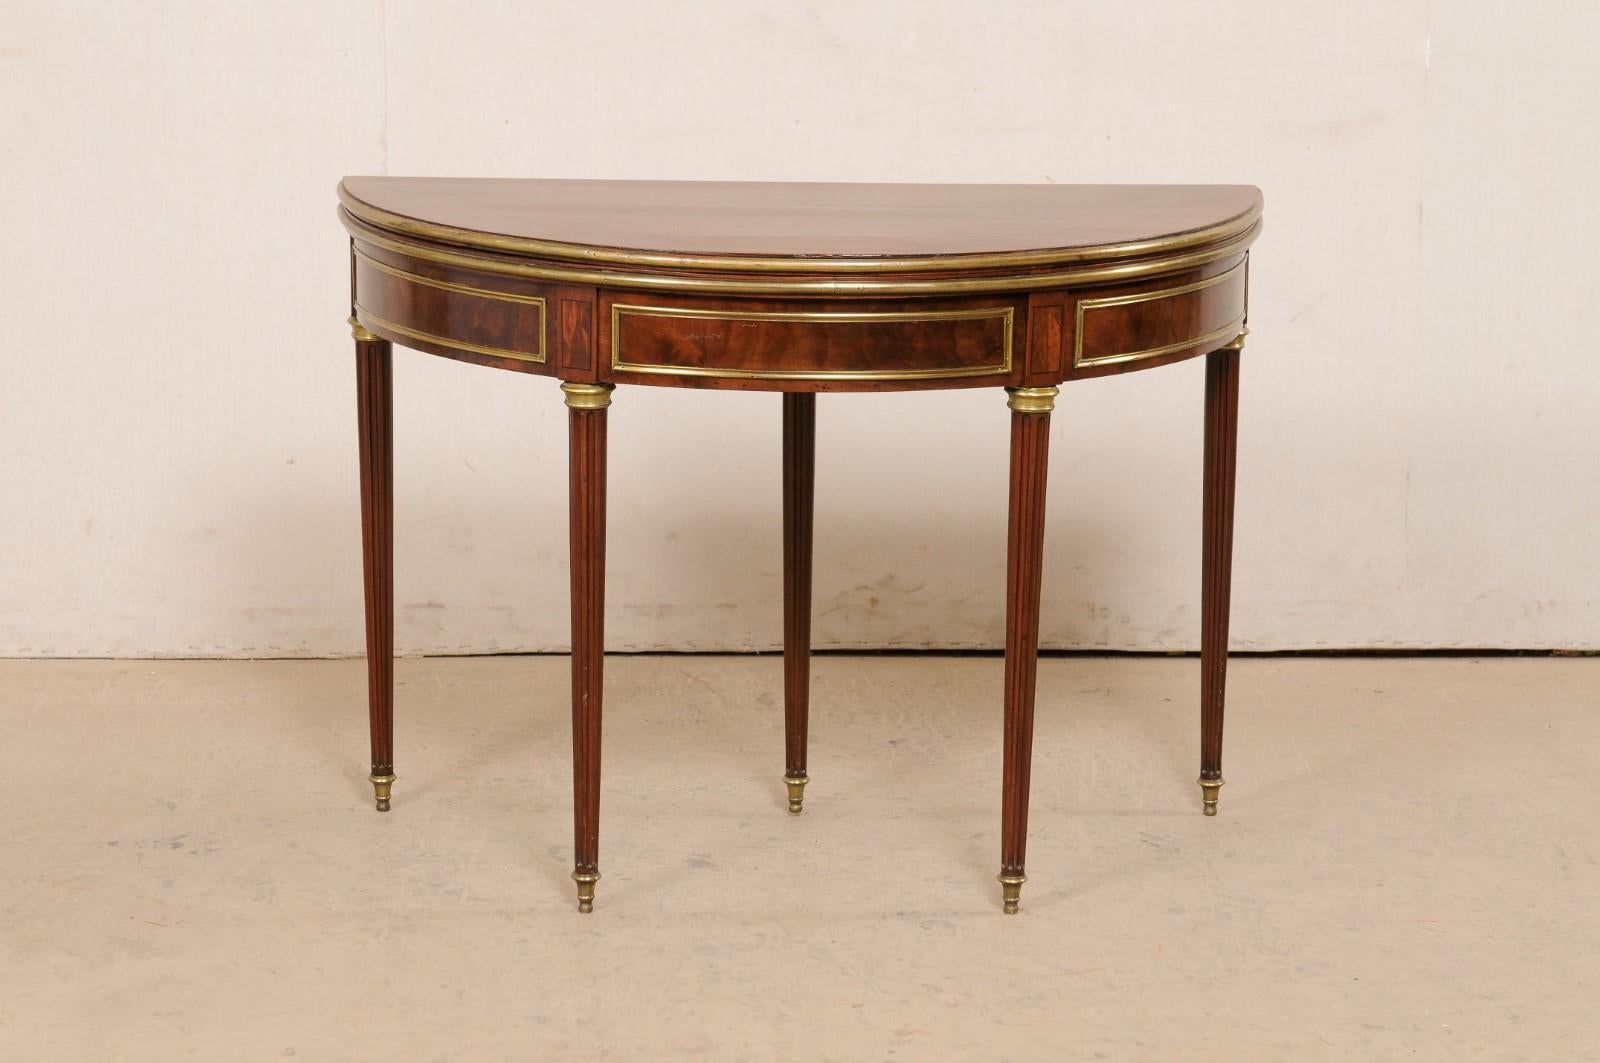 An elegant French Neoclassical demi-to-round table with brass accents from the early to mid 19th century. This antique demi-lune table from France features a half moon top over a rounded apron, and is raised upon five flute-carved rounded legs, that